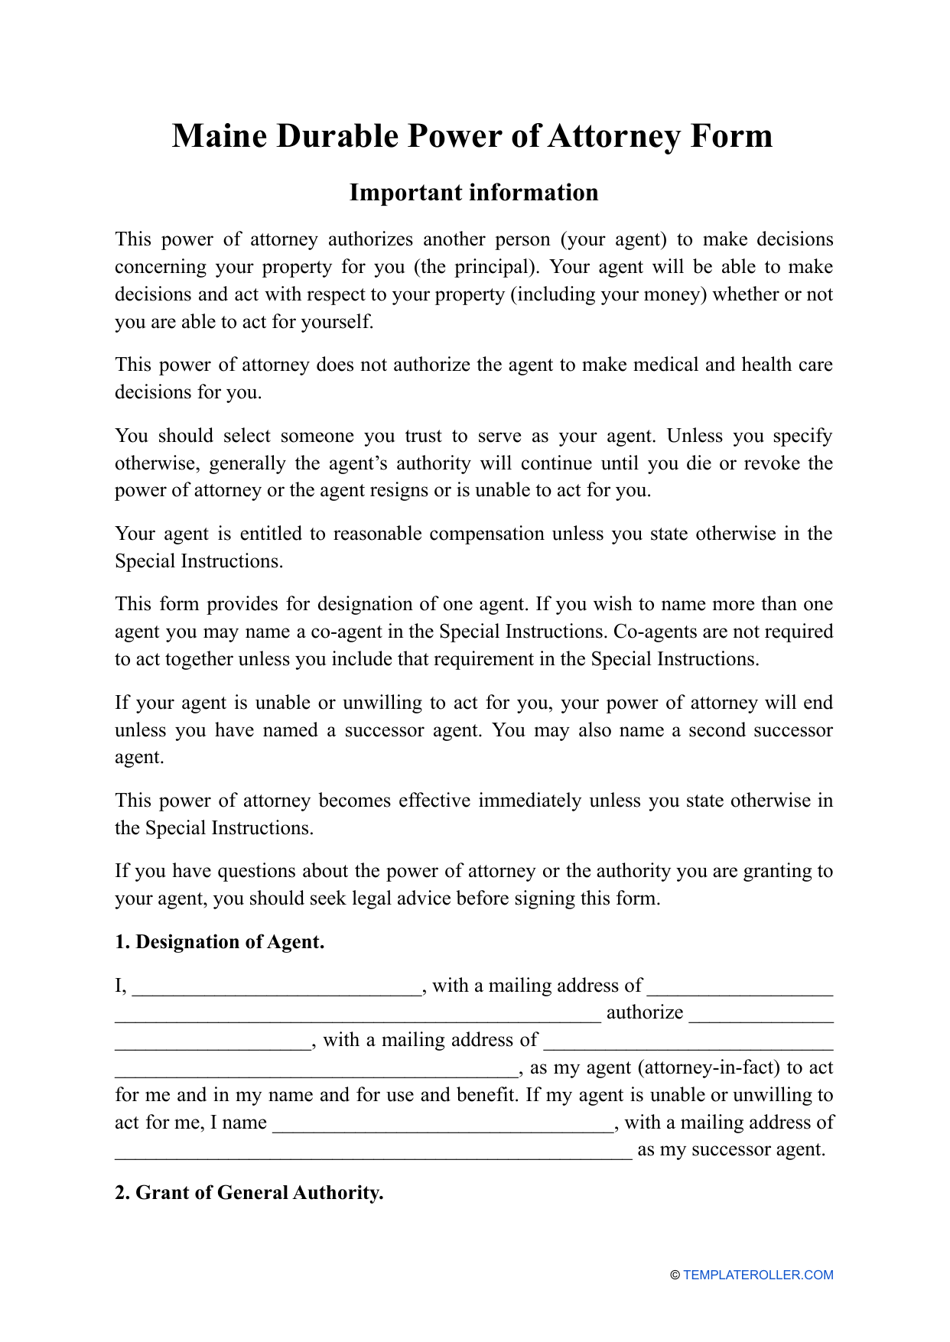 Durable Power of Attorney Form - Maine, Page 1